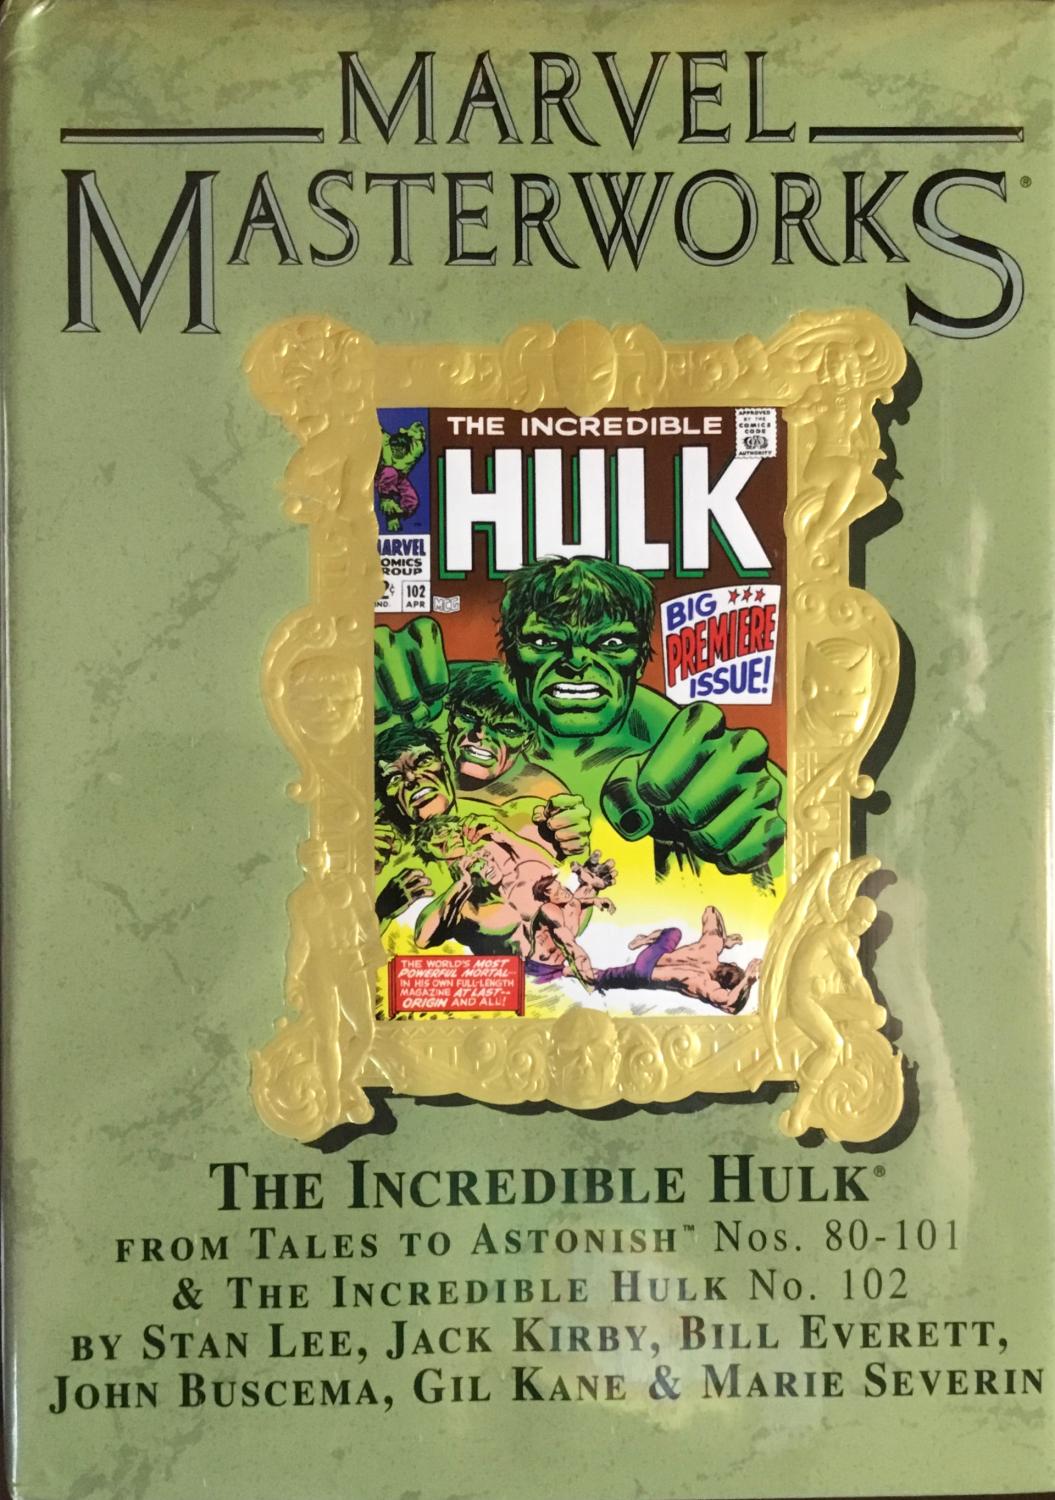 MARVEL MASTERWORKS Vol. 56 (Variant Gold Foil Edition) : The INCREDIBLE HULK From TALES TO ASTONISH Nos. 80-101 & HULK No. 102 - LEE, STAN